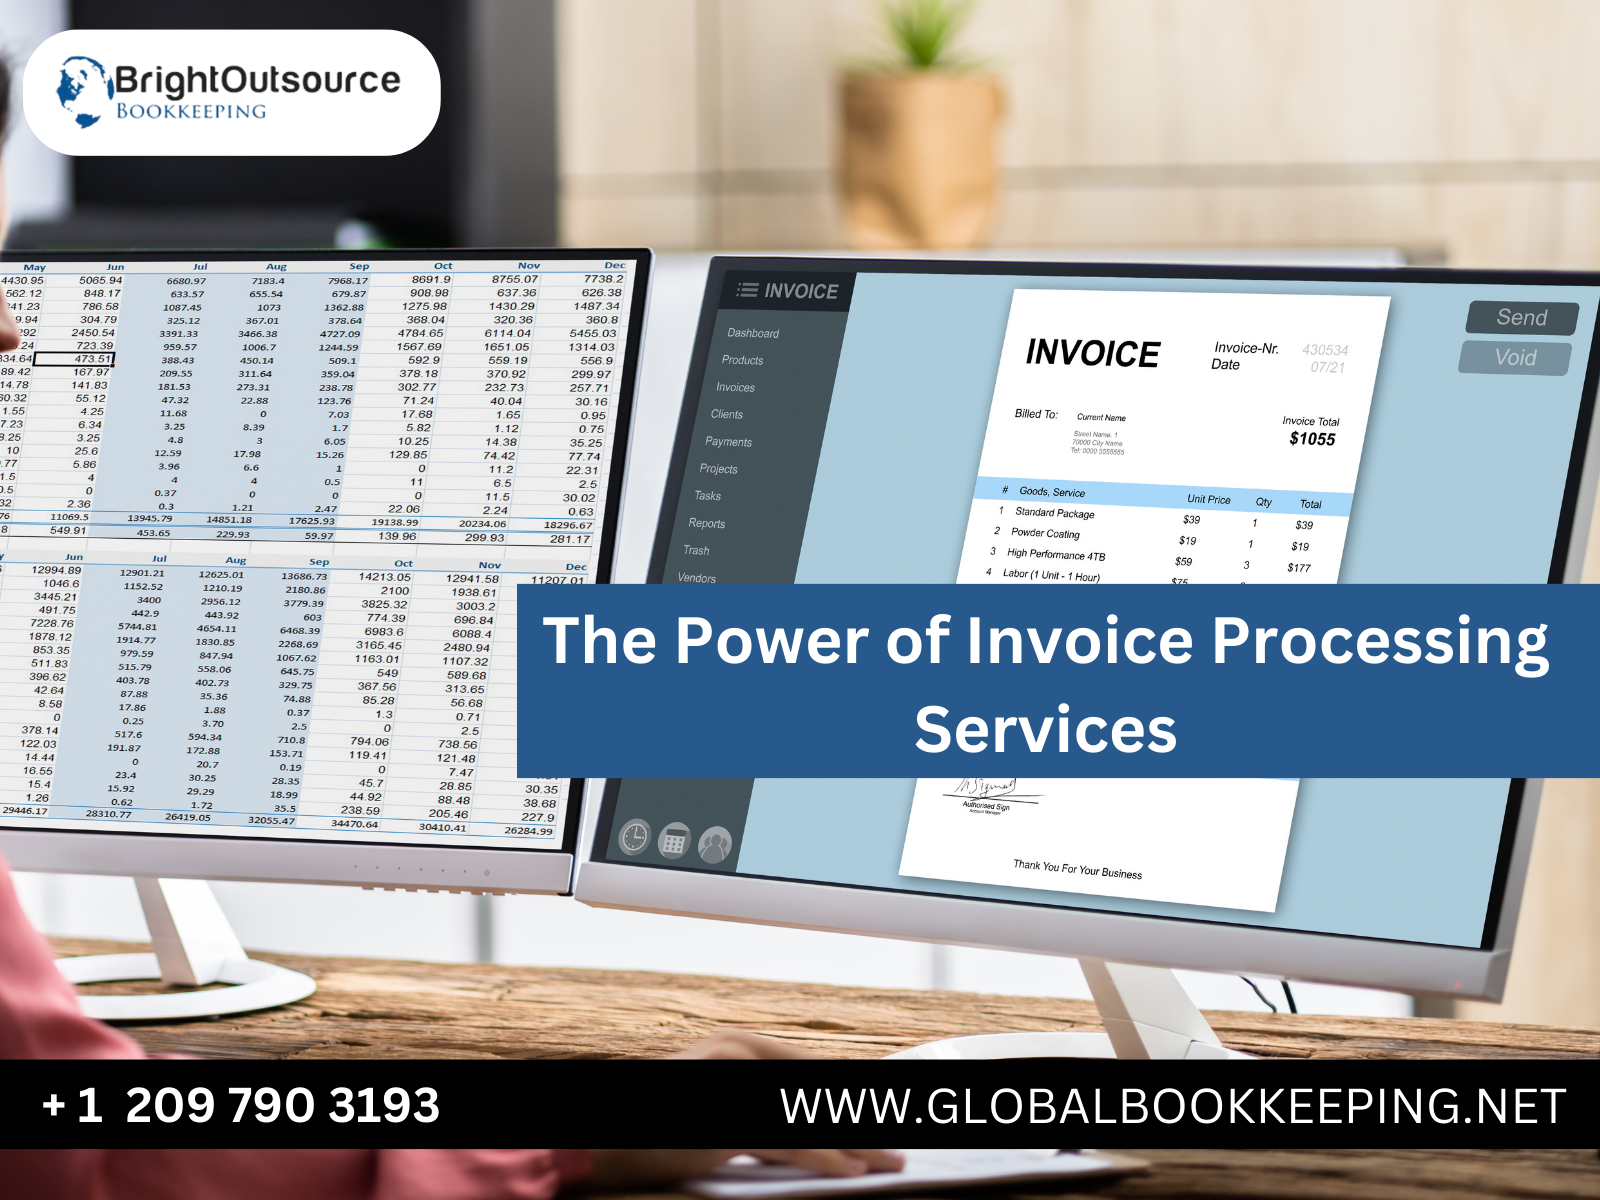 The Power of Invoice Processing Services | GlobalBookkeeping.net